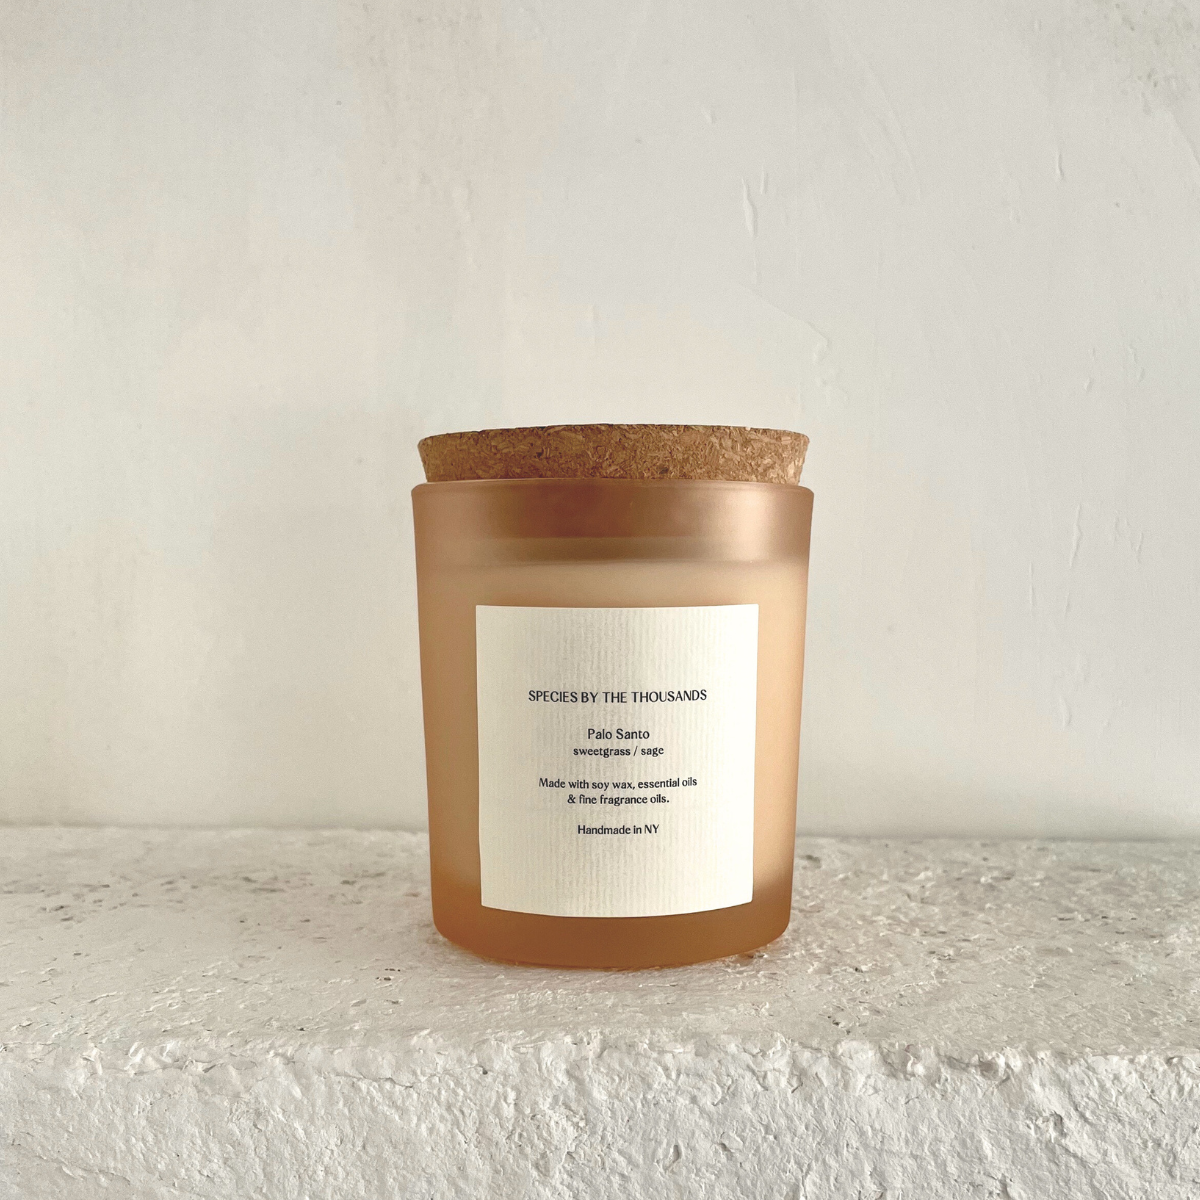 Species by the Thousands | Palo Santo, Sweetgrass + Sage Handcrafted Scented Soy Candle